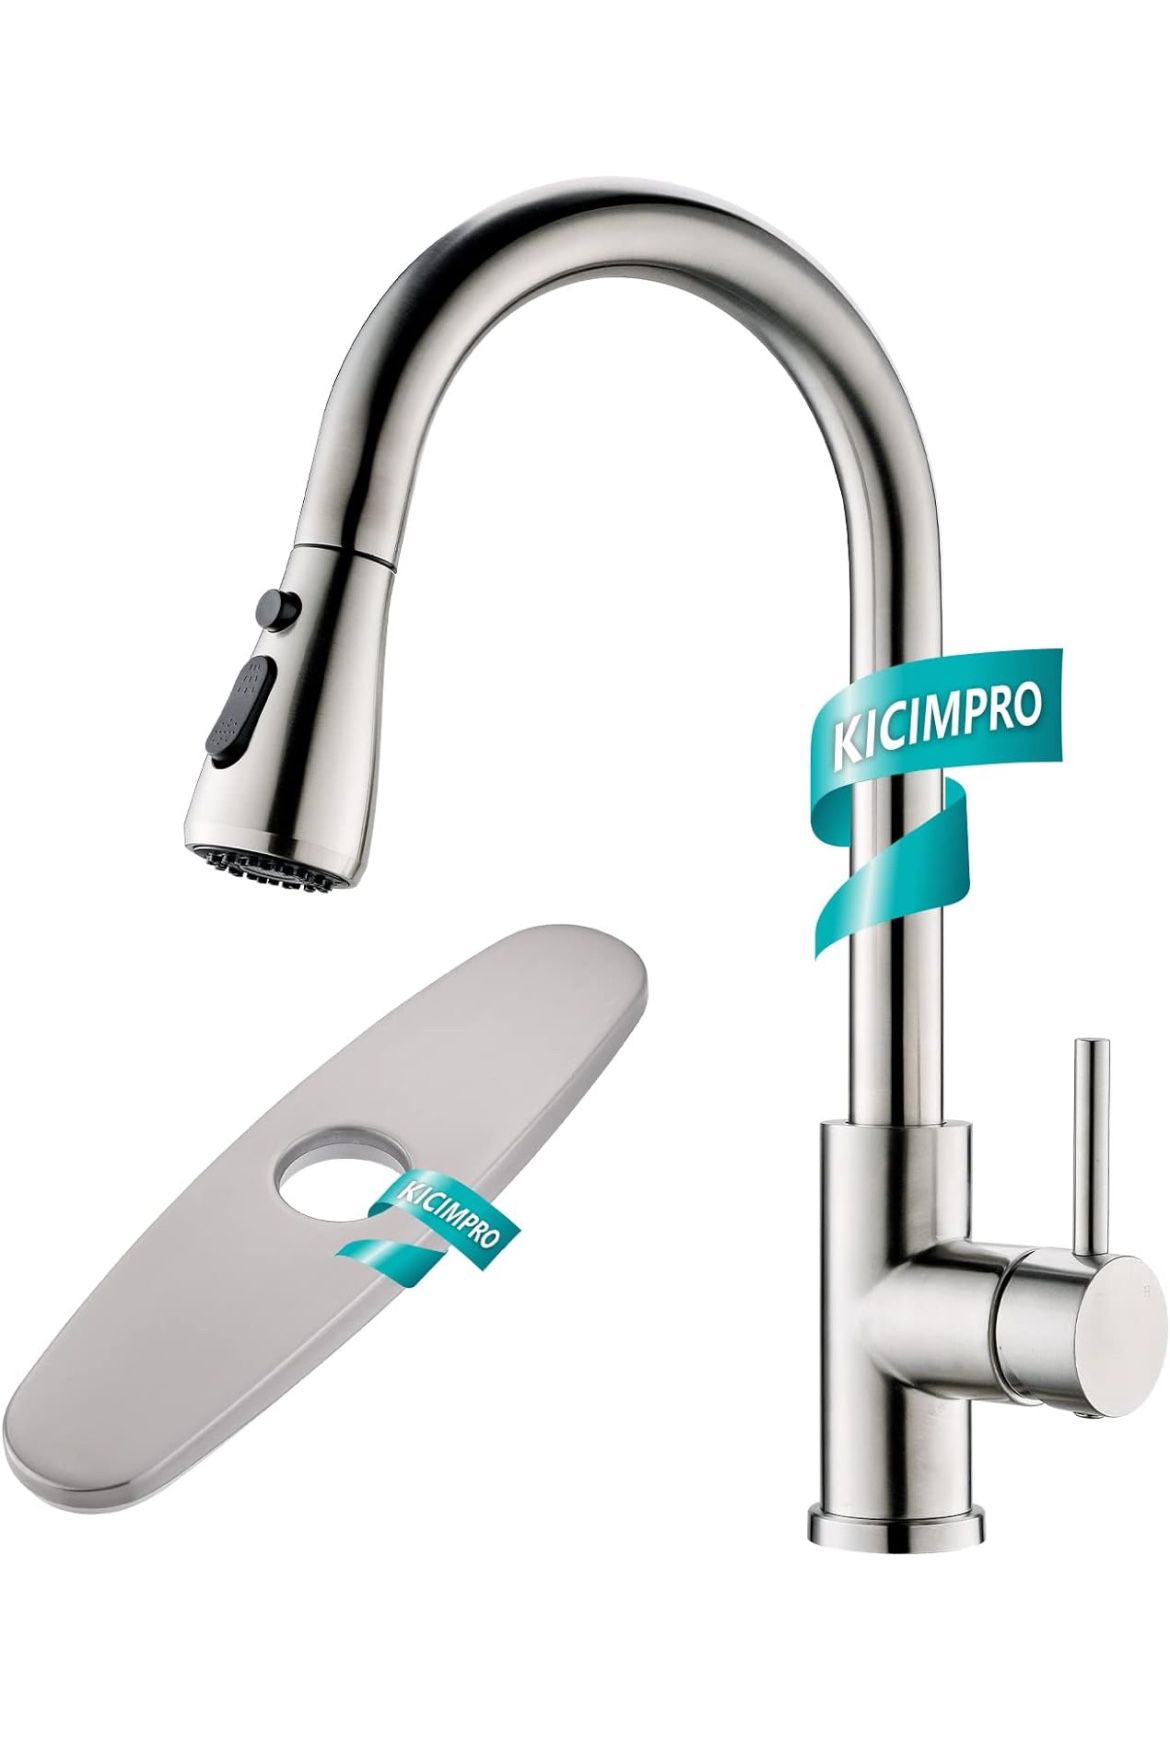 YUL Kicimpro Kitchen Faucet with Pull Down Sprayer Brushed Nickel, High Arc Single Handle Kitchen Sink Faucet with Faucet Plate